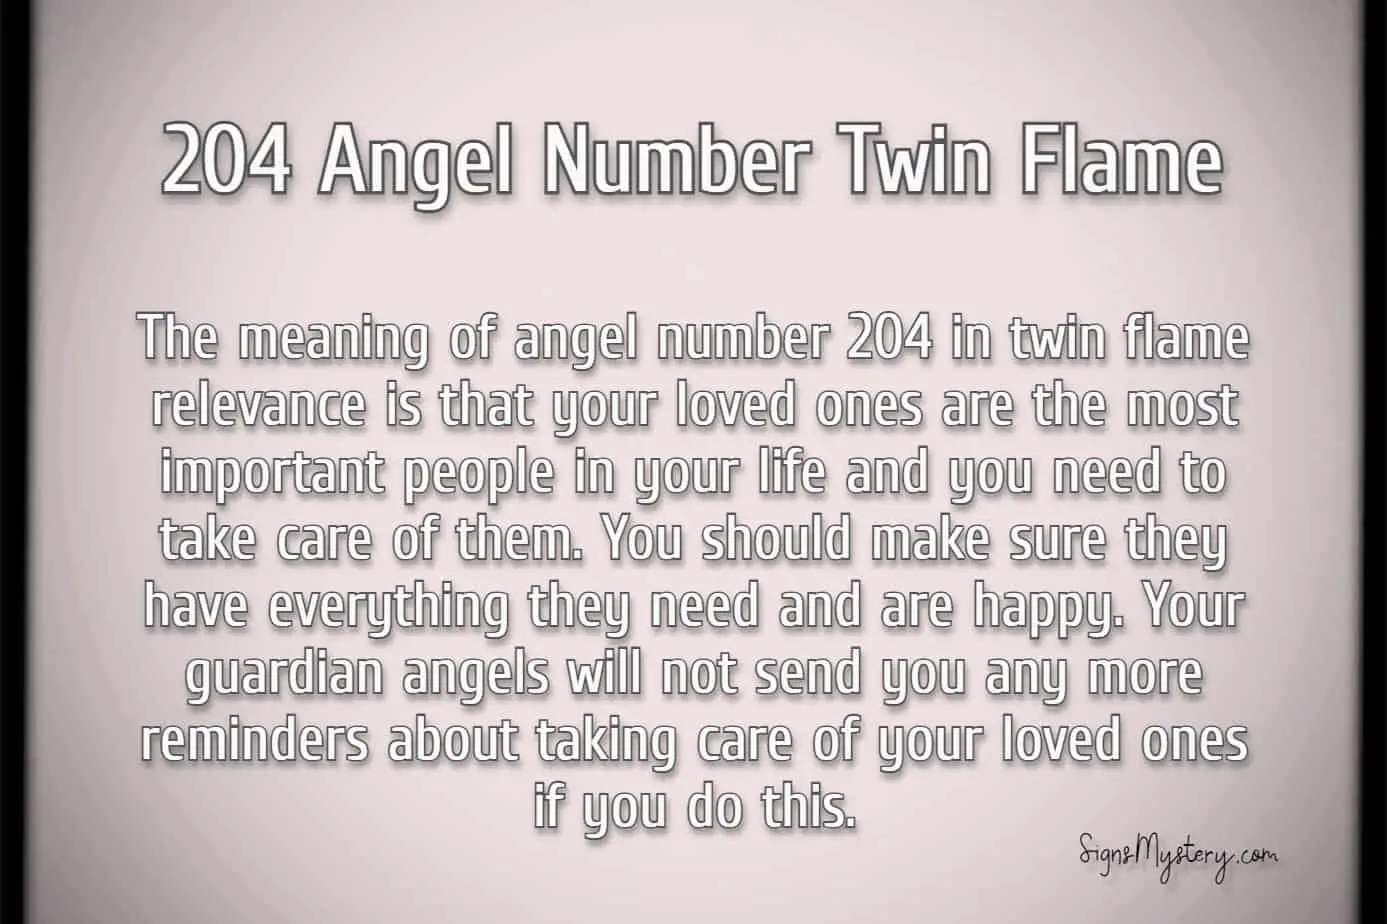 204 angel number twin flame